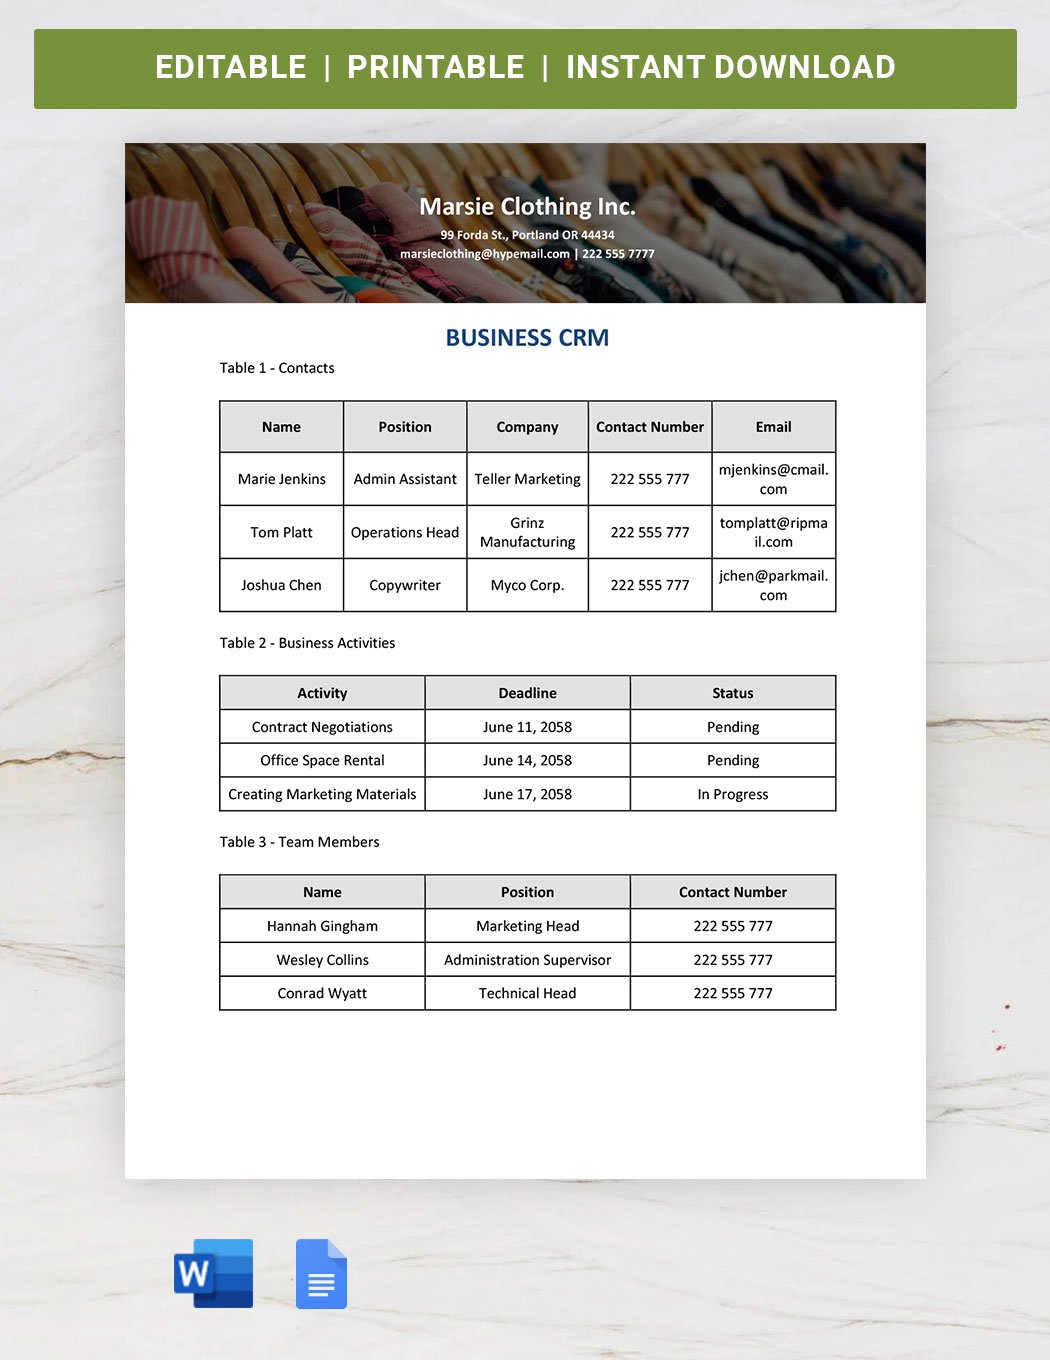 Business CRM Template